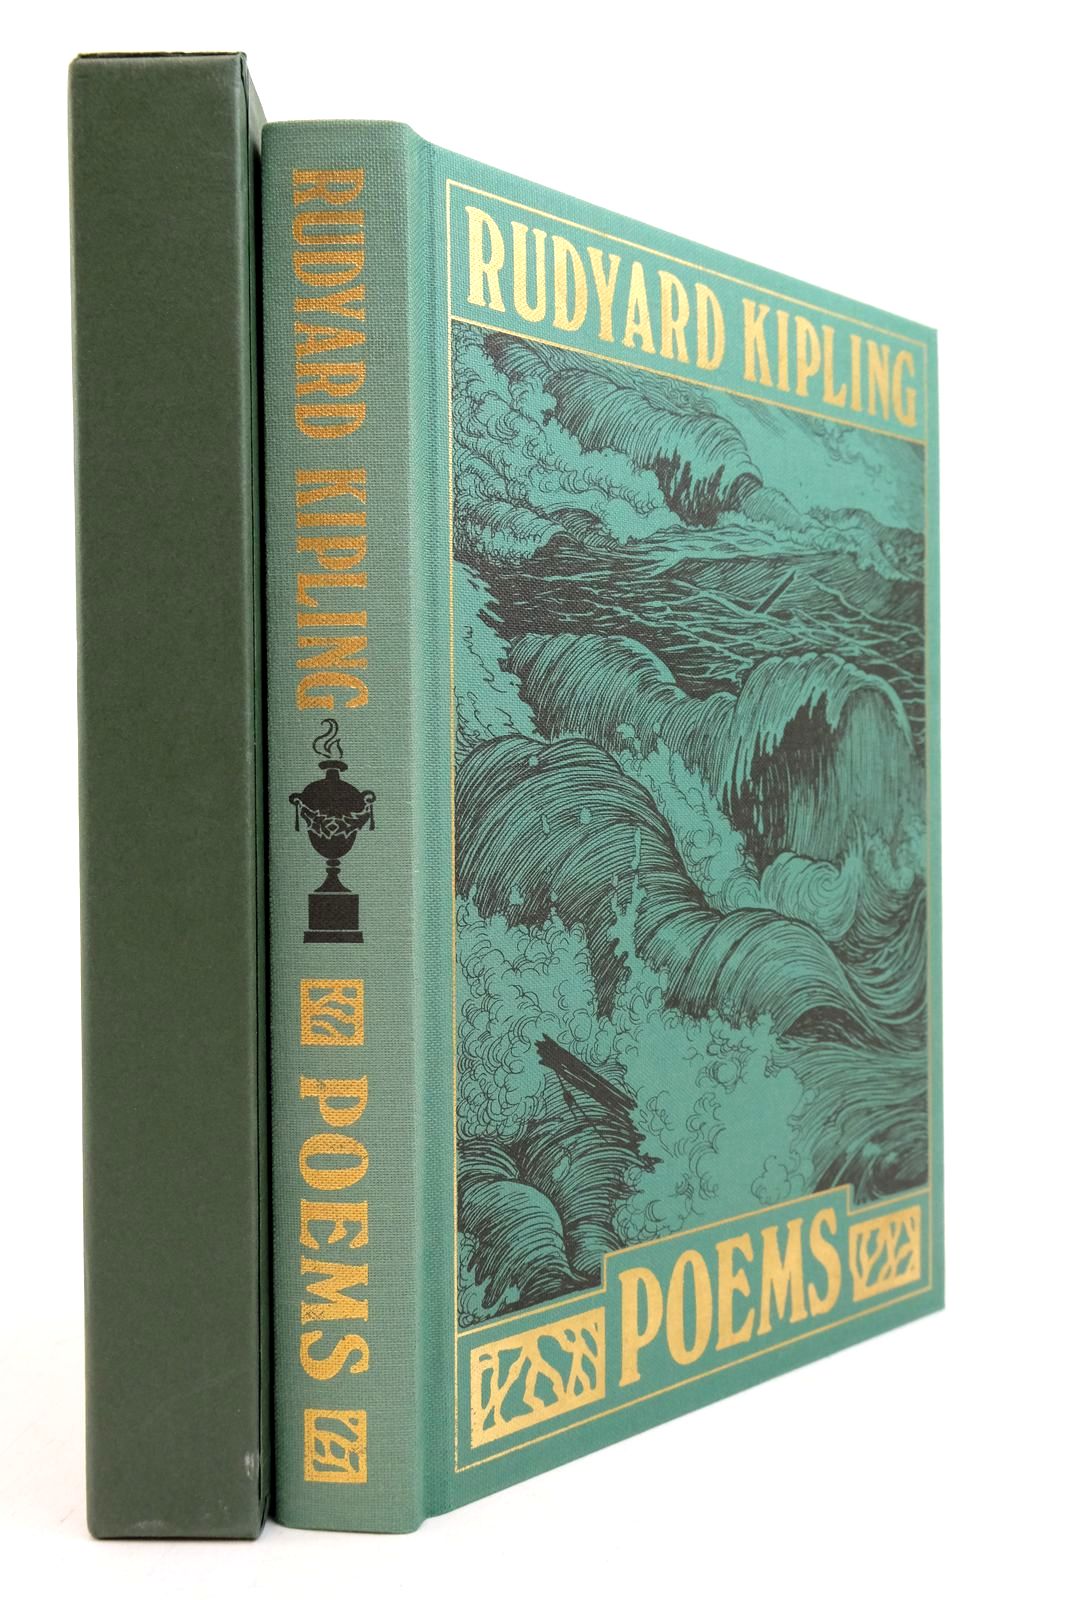 Photo of POEMS written by Kipling, Rudyard illustrated by Robinson, W. Heath published by Folio Society (STOCK CODE: 2139470)  for sale by Stella & Rose's Books